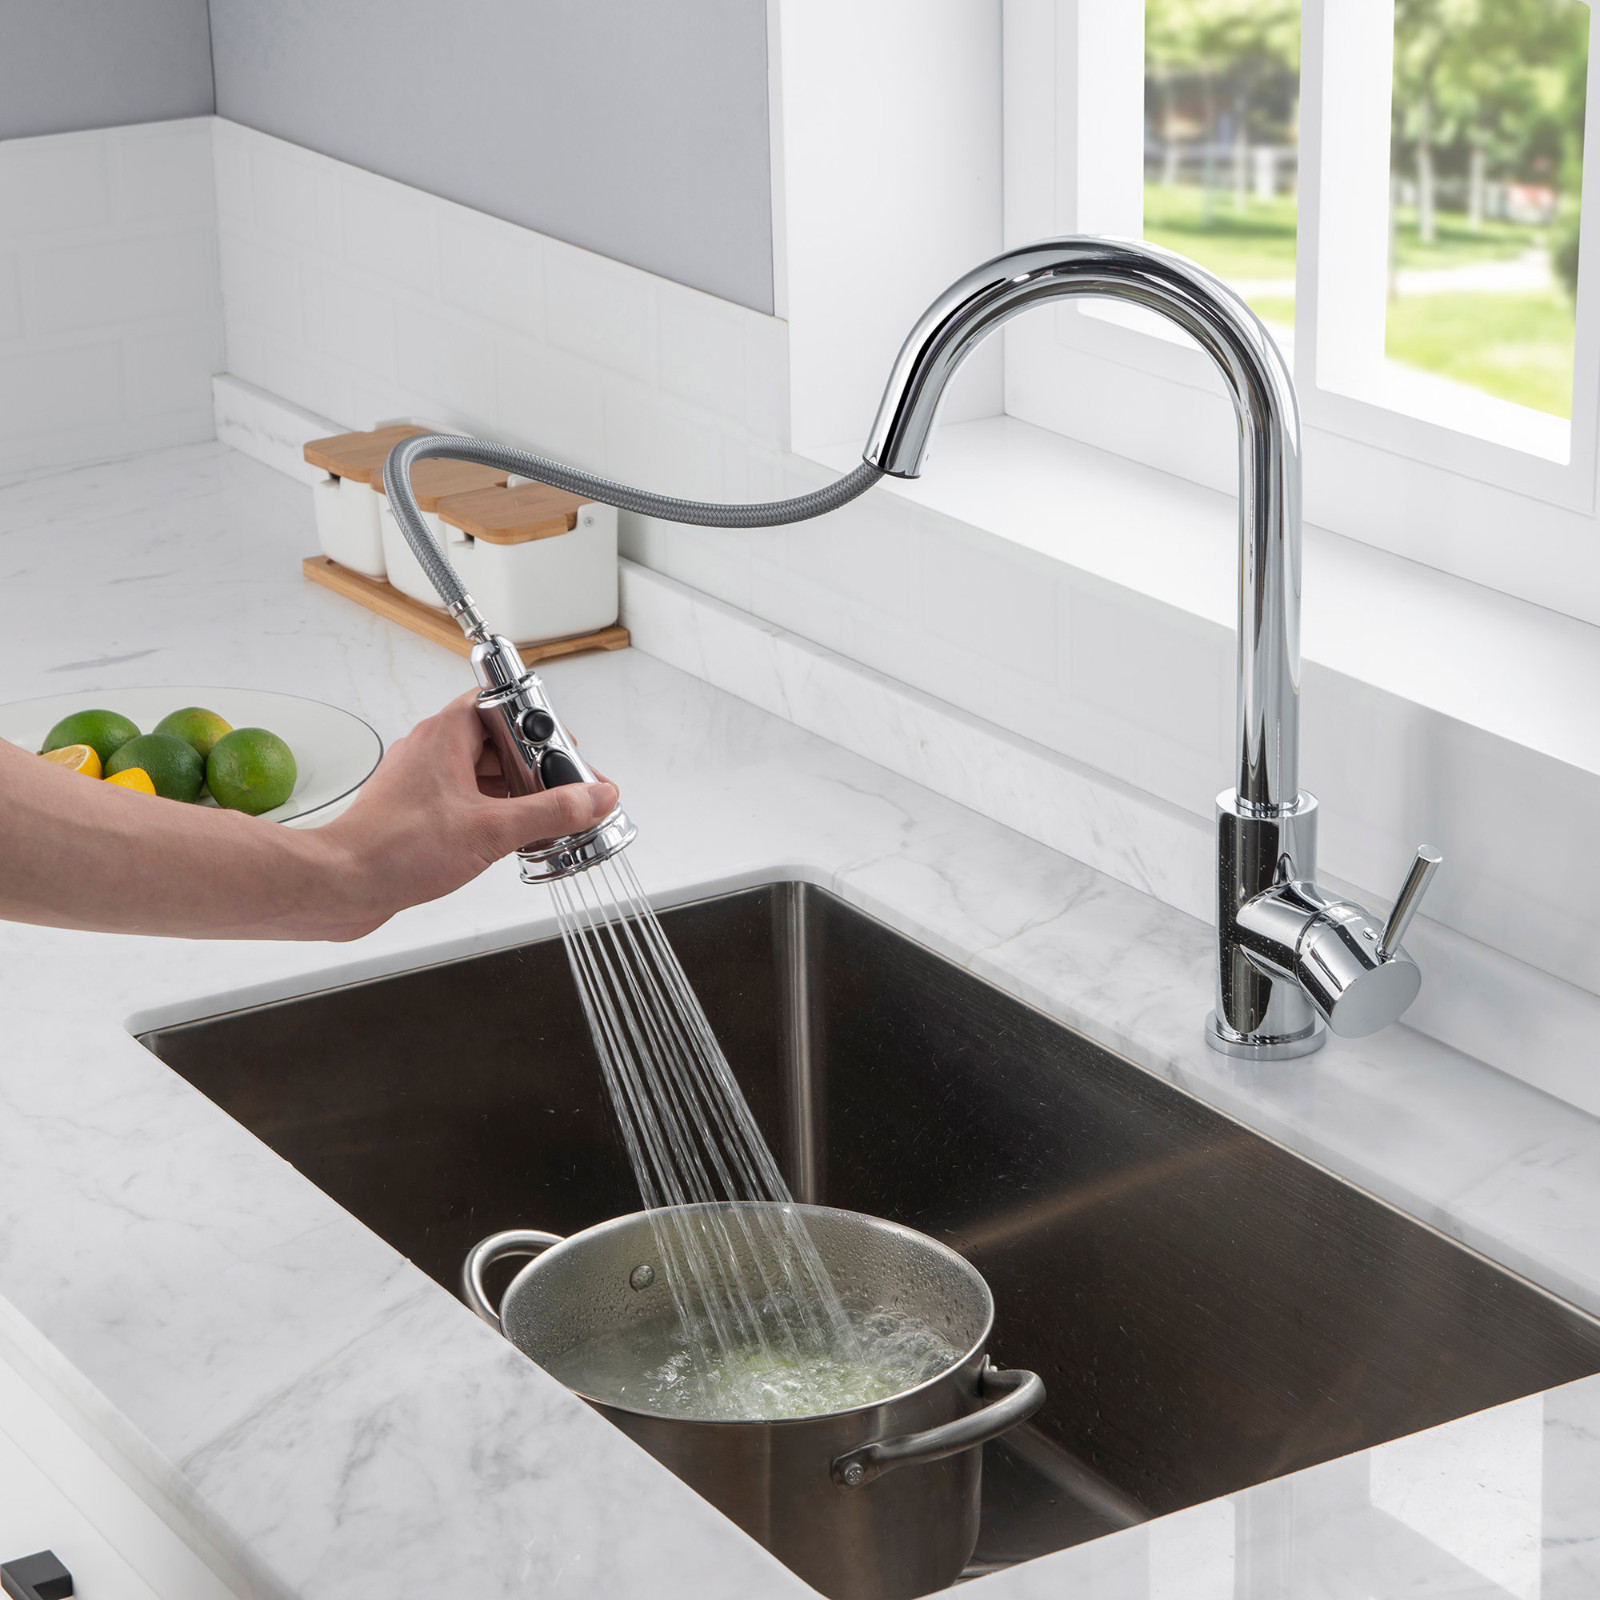  WOODBRIDGE WK090801CH Stainless Steel Single Handle Pull Down Kitchen Faucet in Chrome Finish._9402